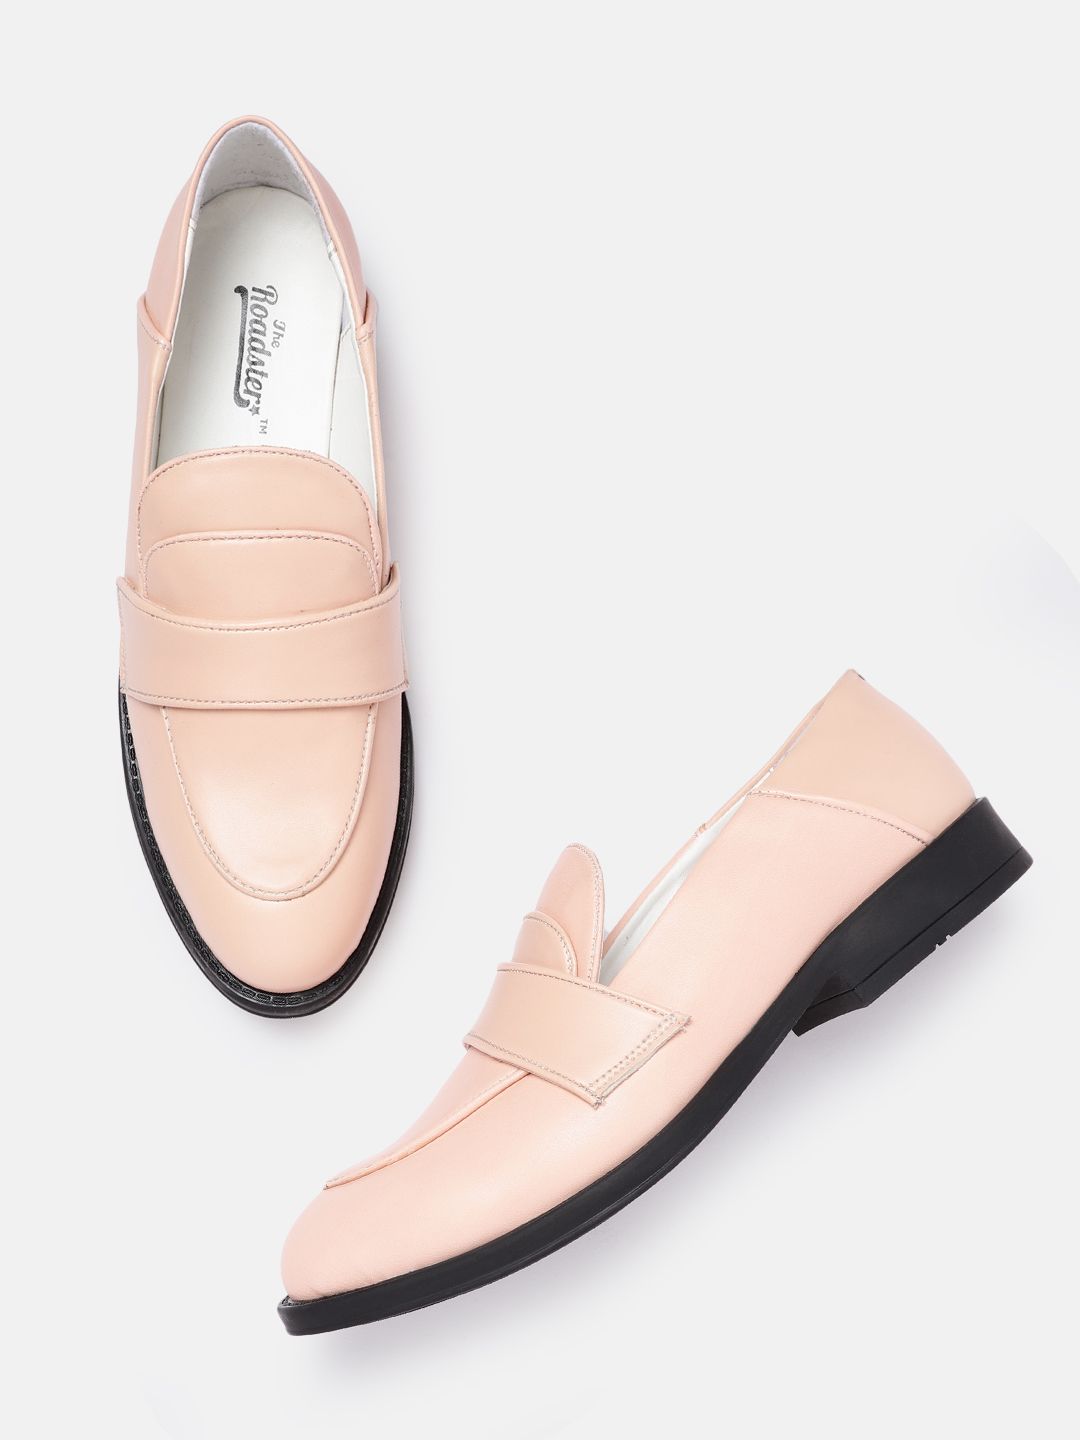 Roadster Women Peach-Coloured Slip-On Sneakers Price in India